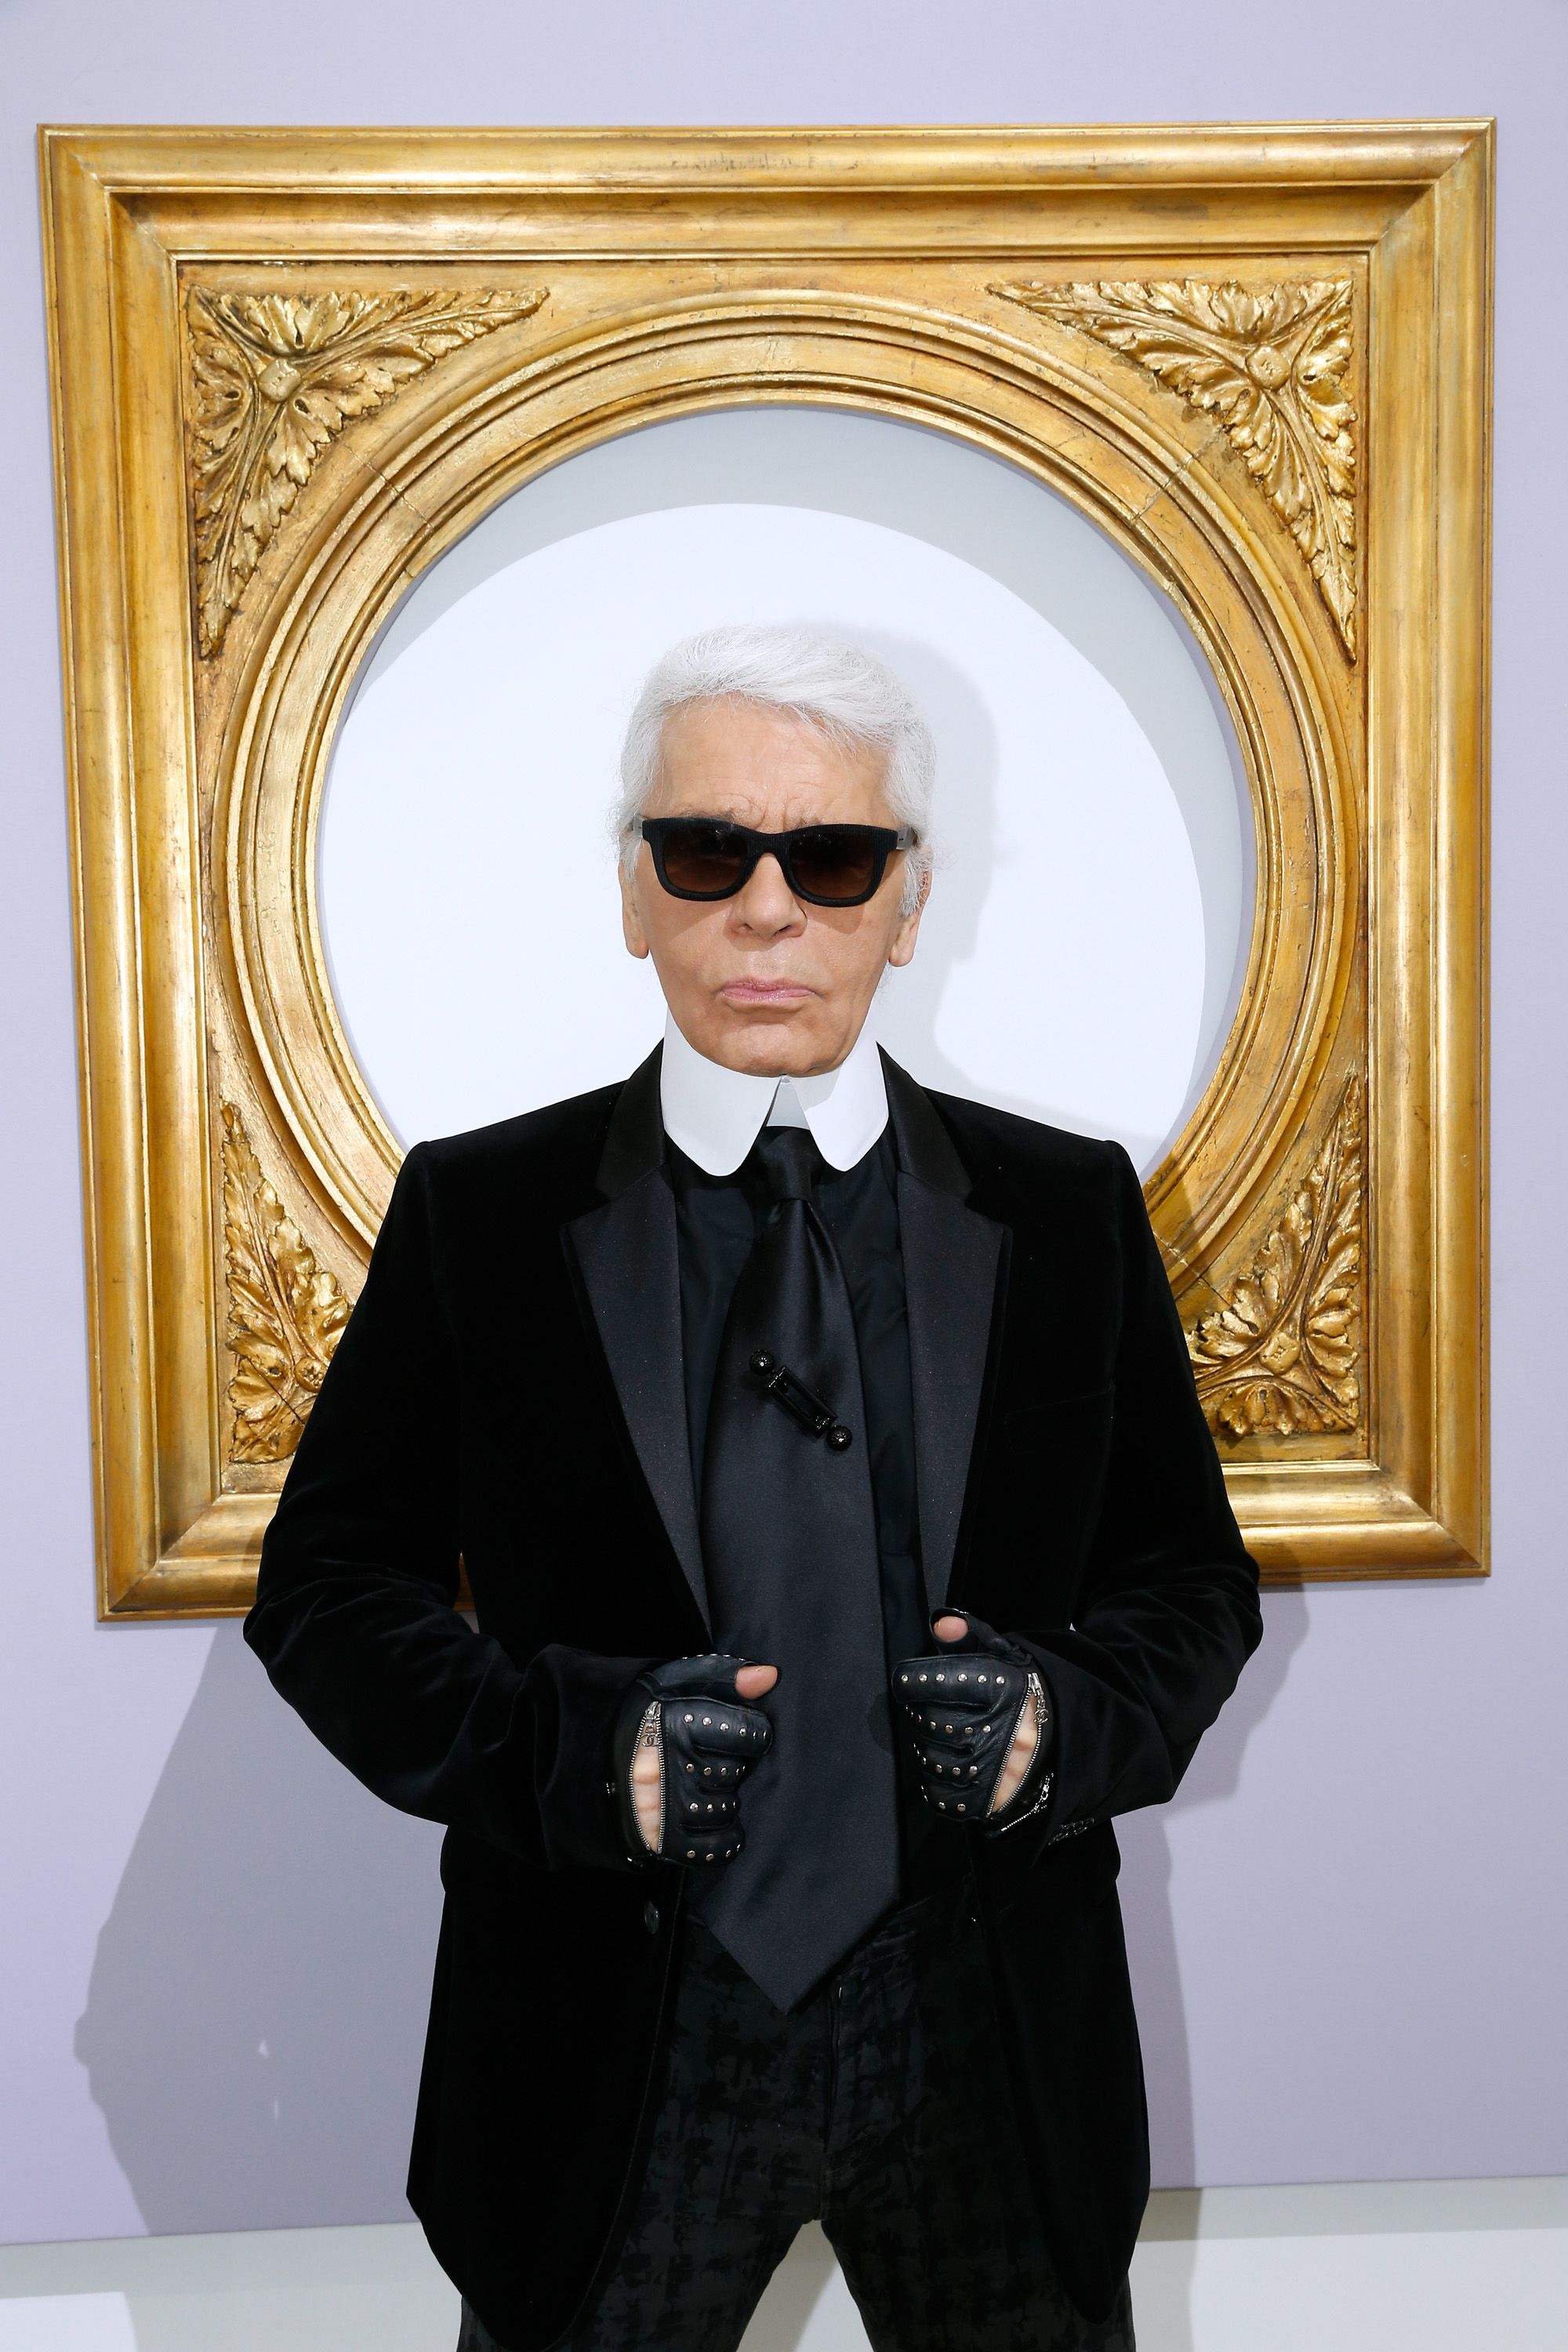 Karl Lagerfeld: the controversial and pioneering designer inspiring this  year's Met Gala dress code